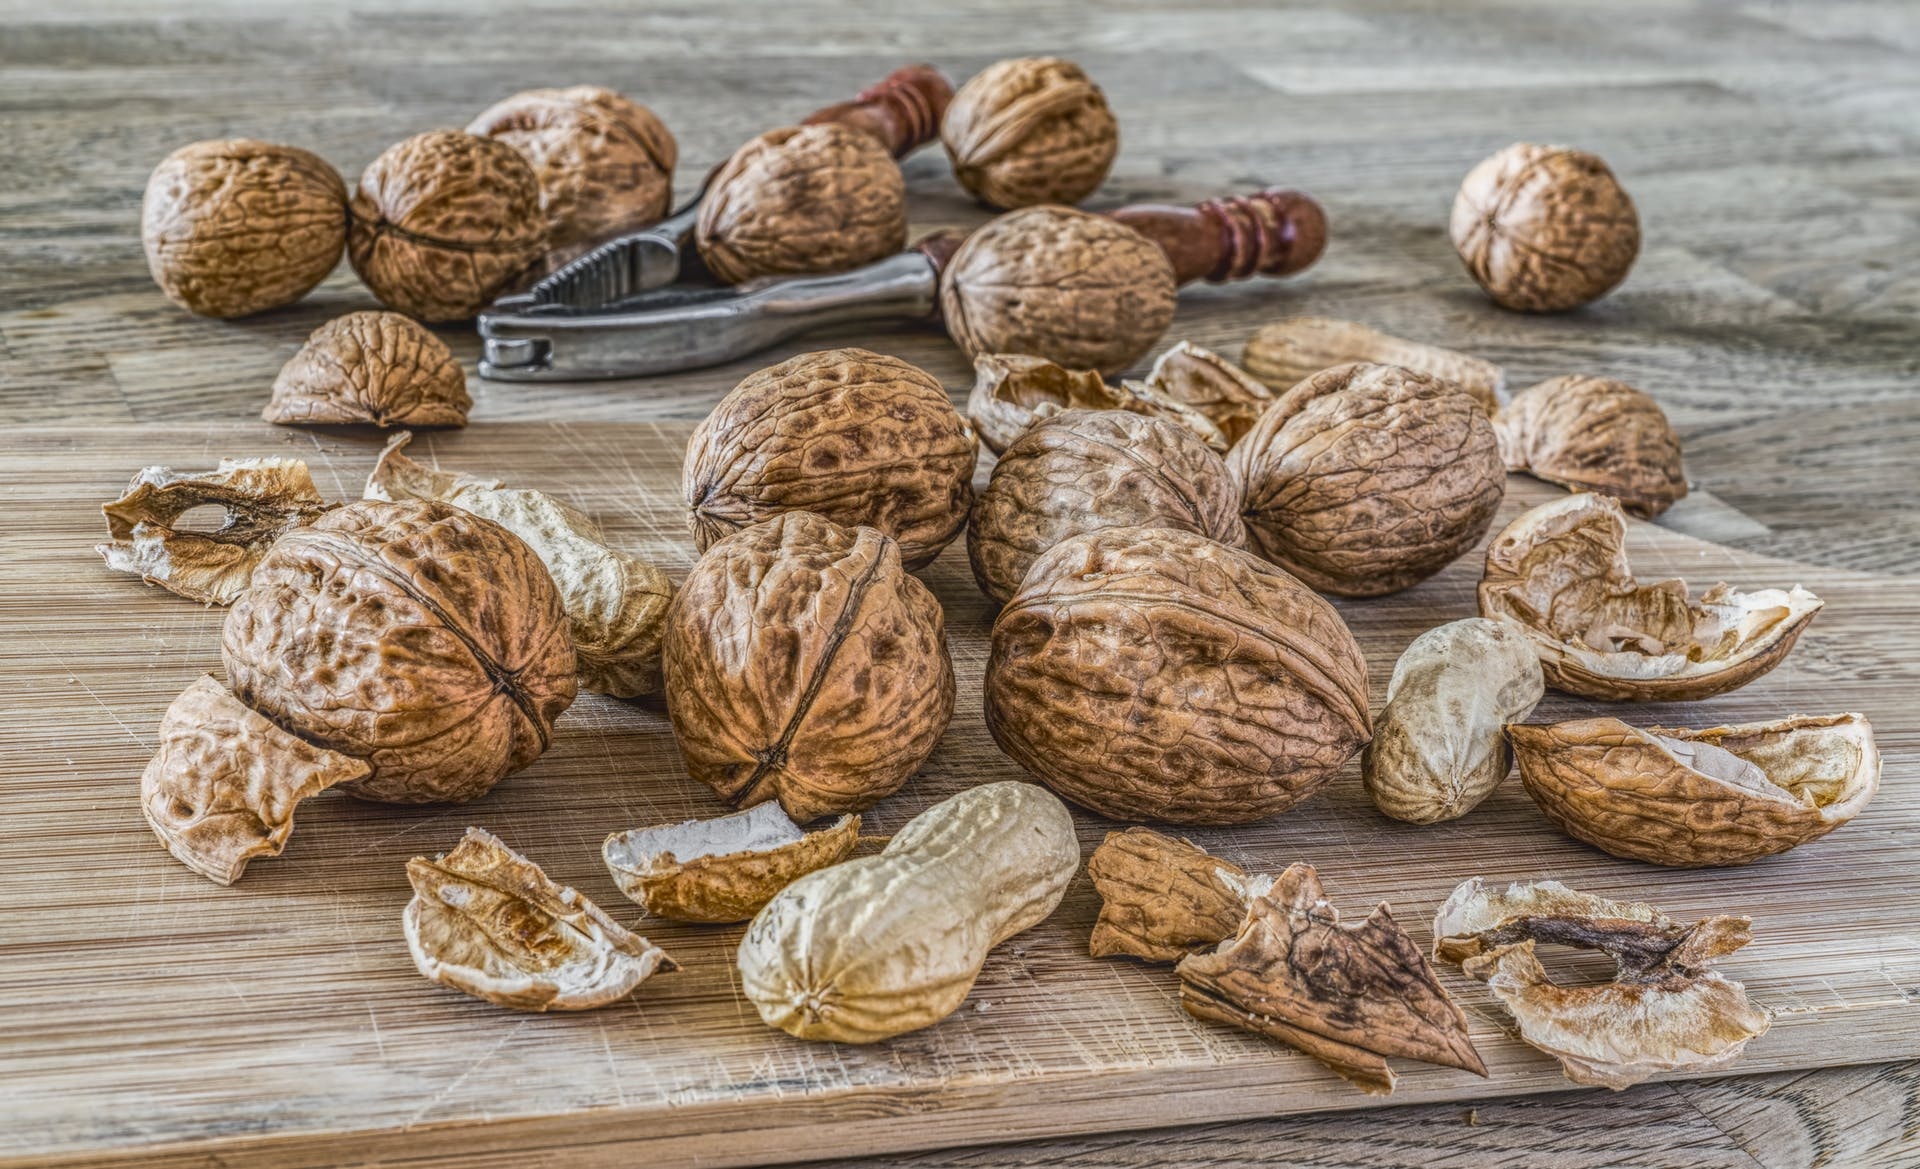 Walnuts, Snack delight, Untreated nuts, Natural product wonder, 1920x1170 HD Desktop